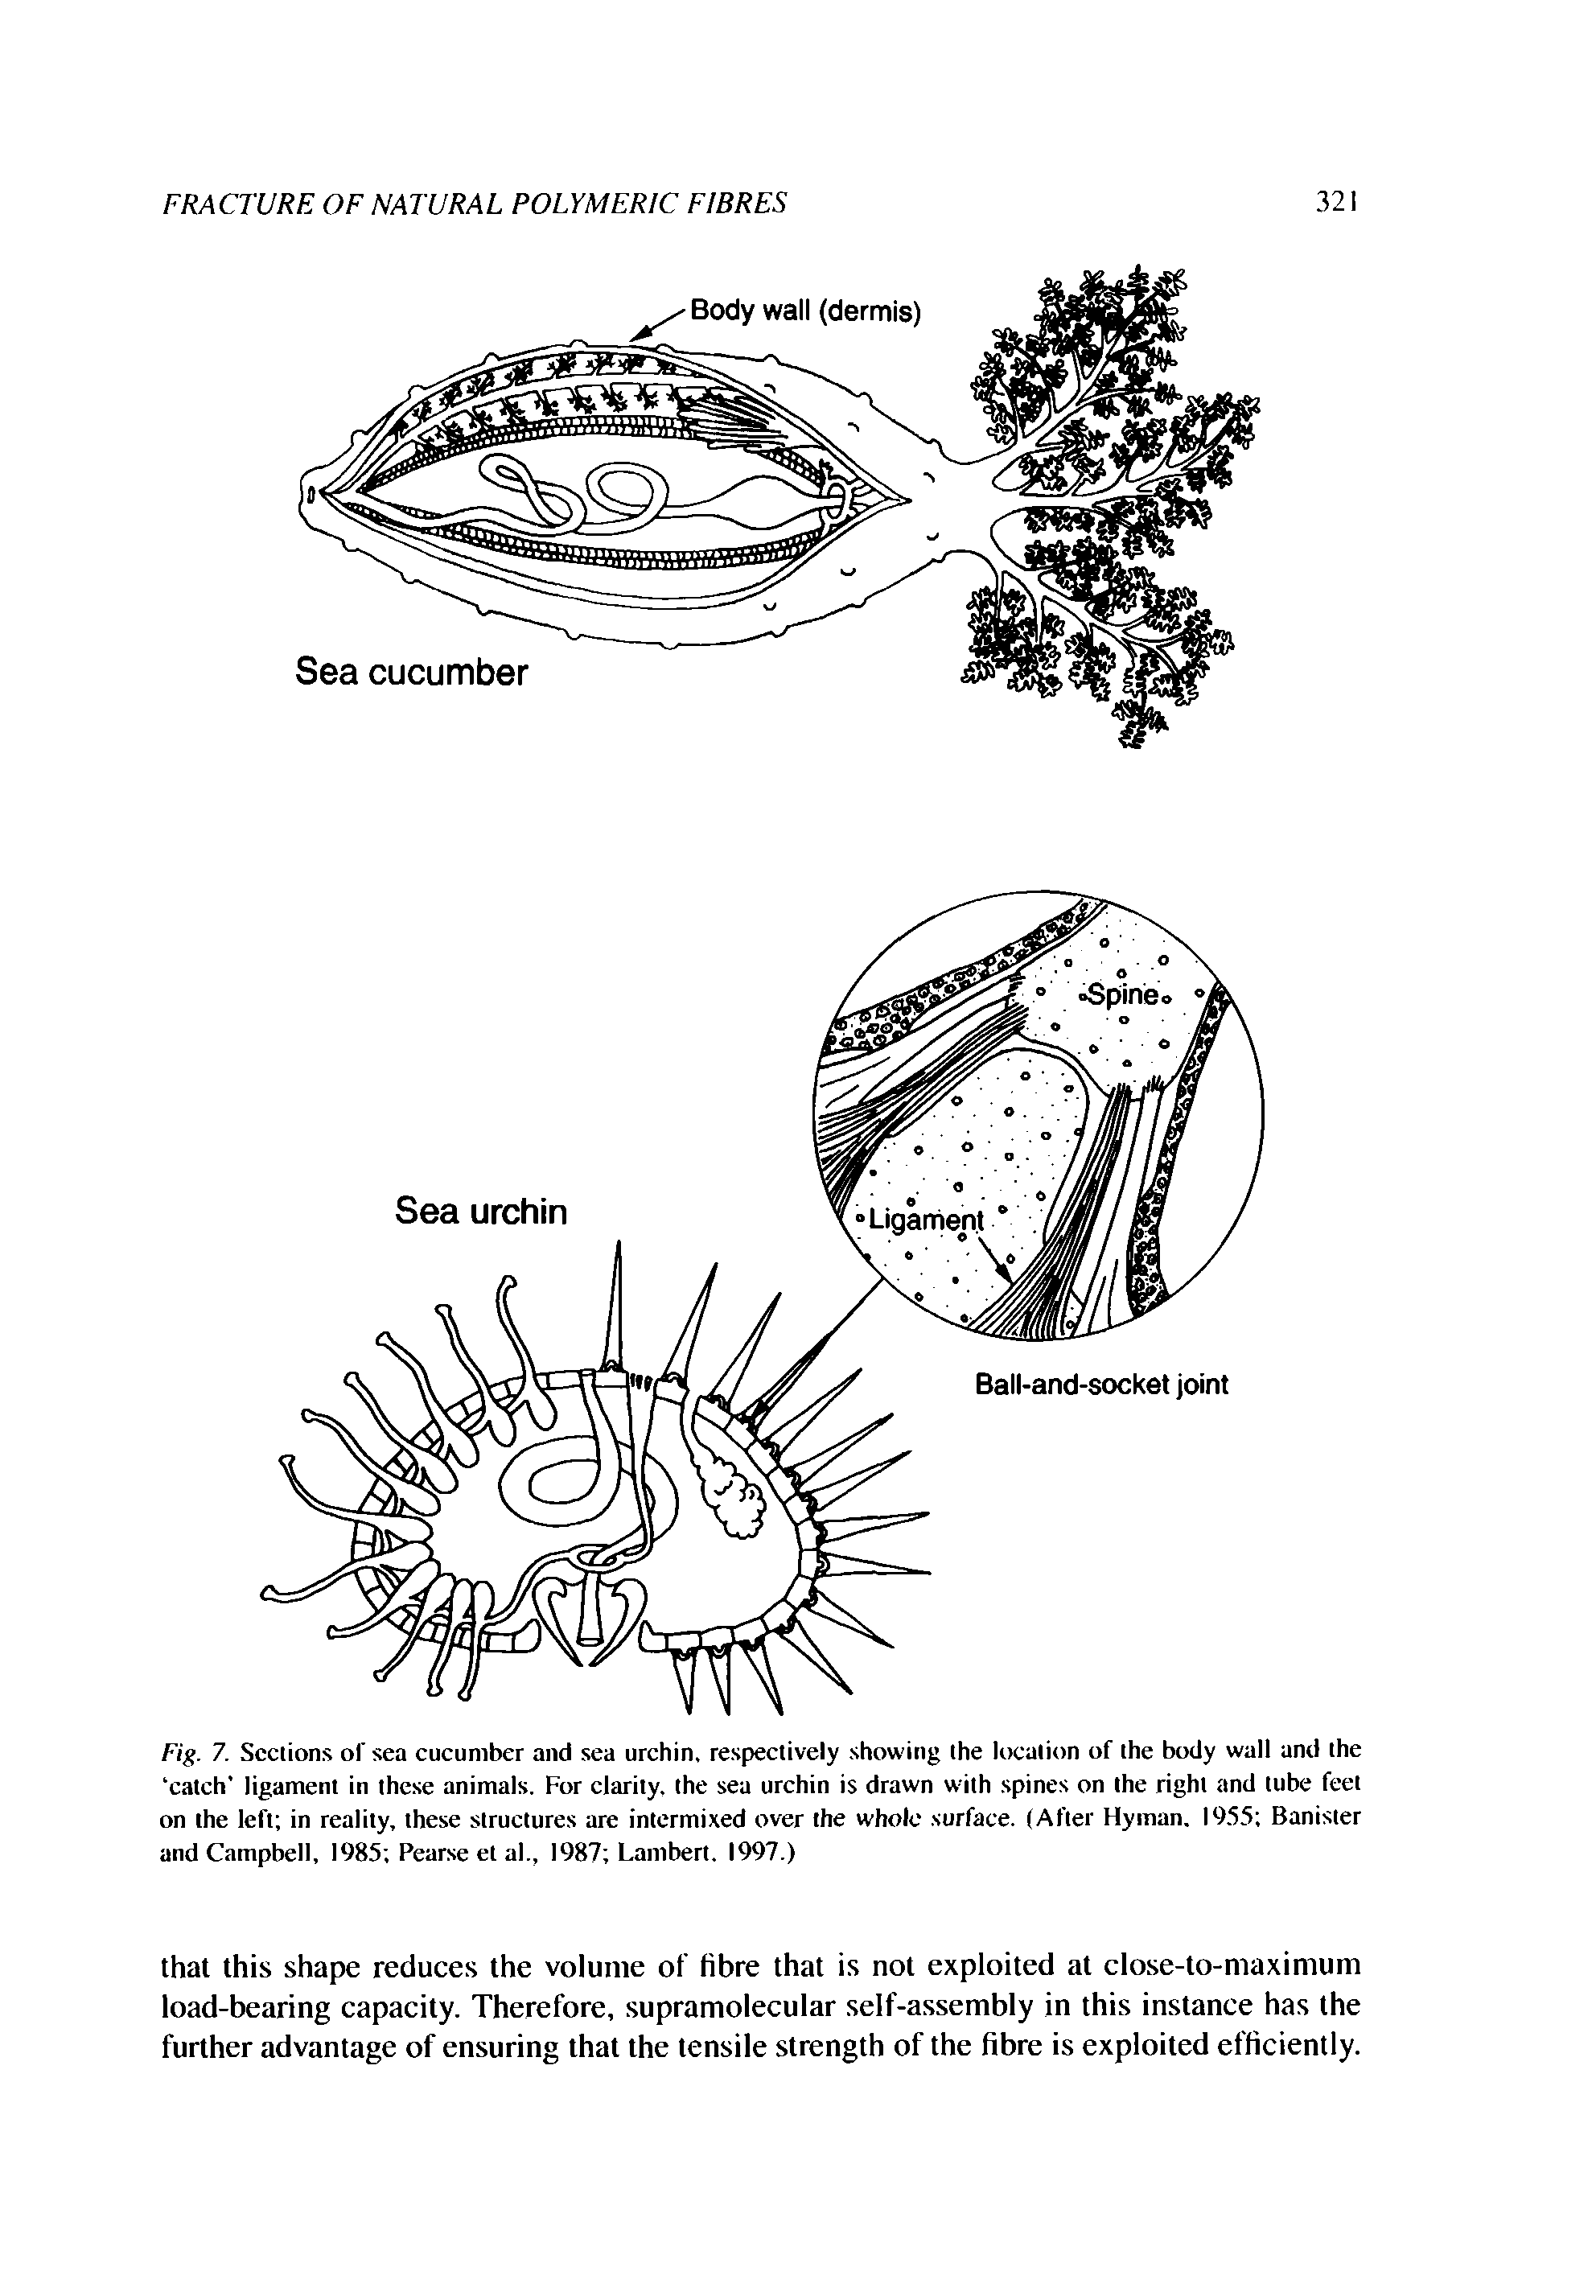 Fig. 7. Sections of sea cucumber and sea urchin, respectively showing the kteation of the body wall and the catch ligament in these animals. For clarity, the sea urchin is drawn with spines on the right and tube feet on the left in reality, these structures are intermixed over the whole surface. (After Hyman. I9. 55 Banister and Campbell, 1985 Pearse el al., 1987 Lambert. 1997.)...